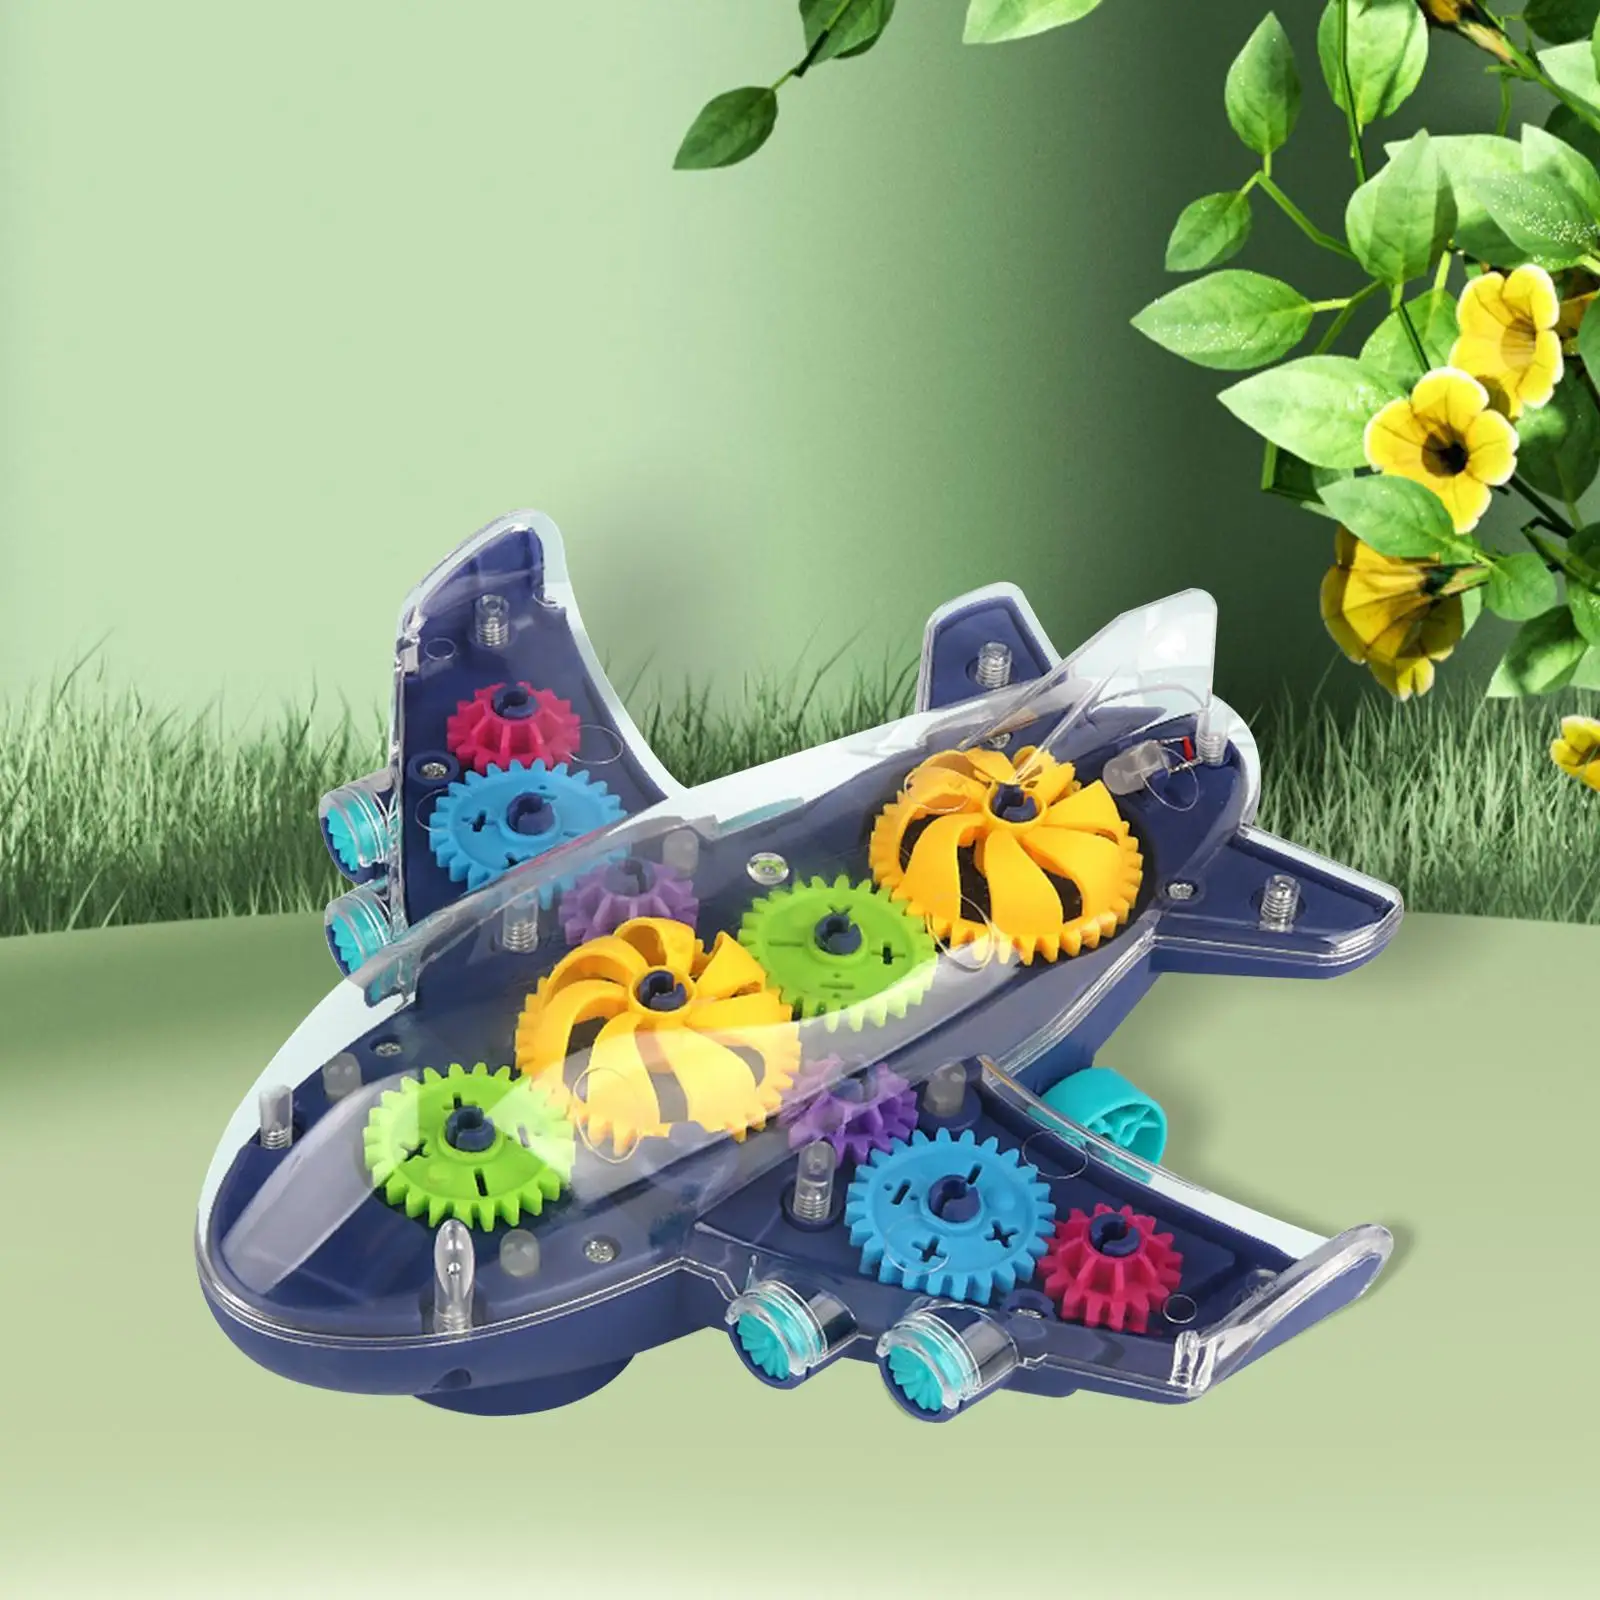 Transparent Mechanical Gear Passenger Plane with Visible Colored Moving Gears for Boys and Girls